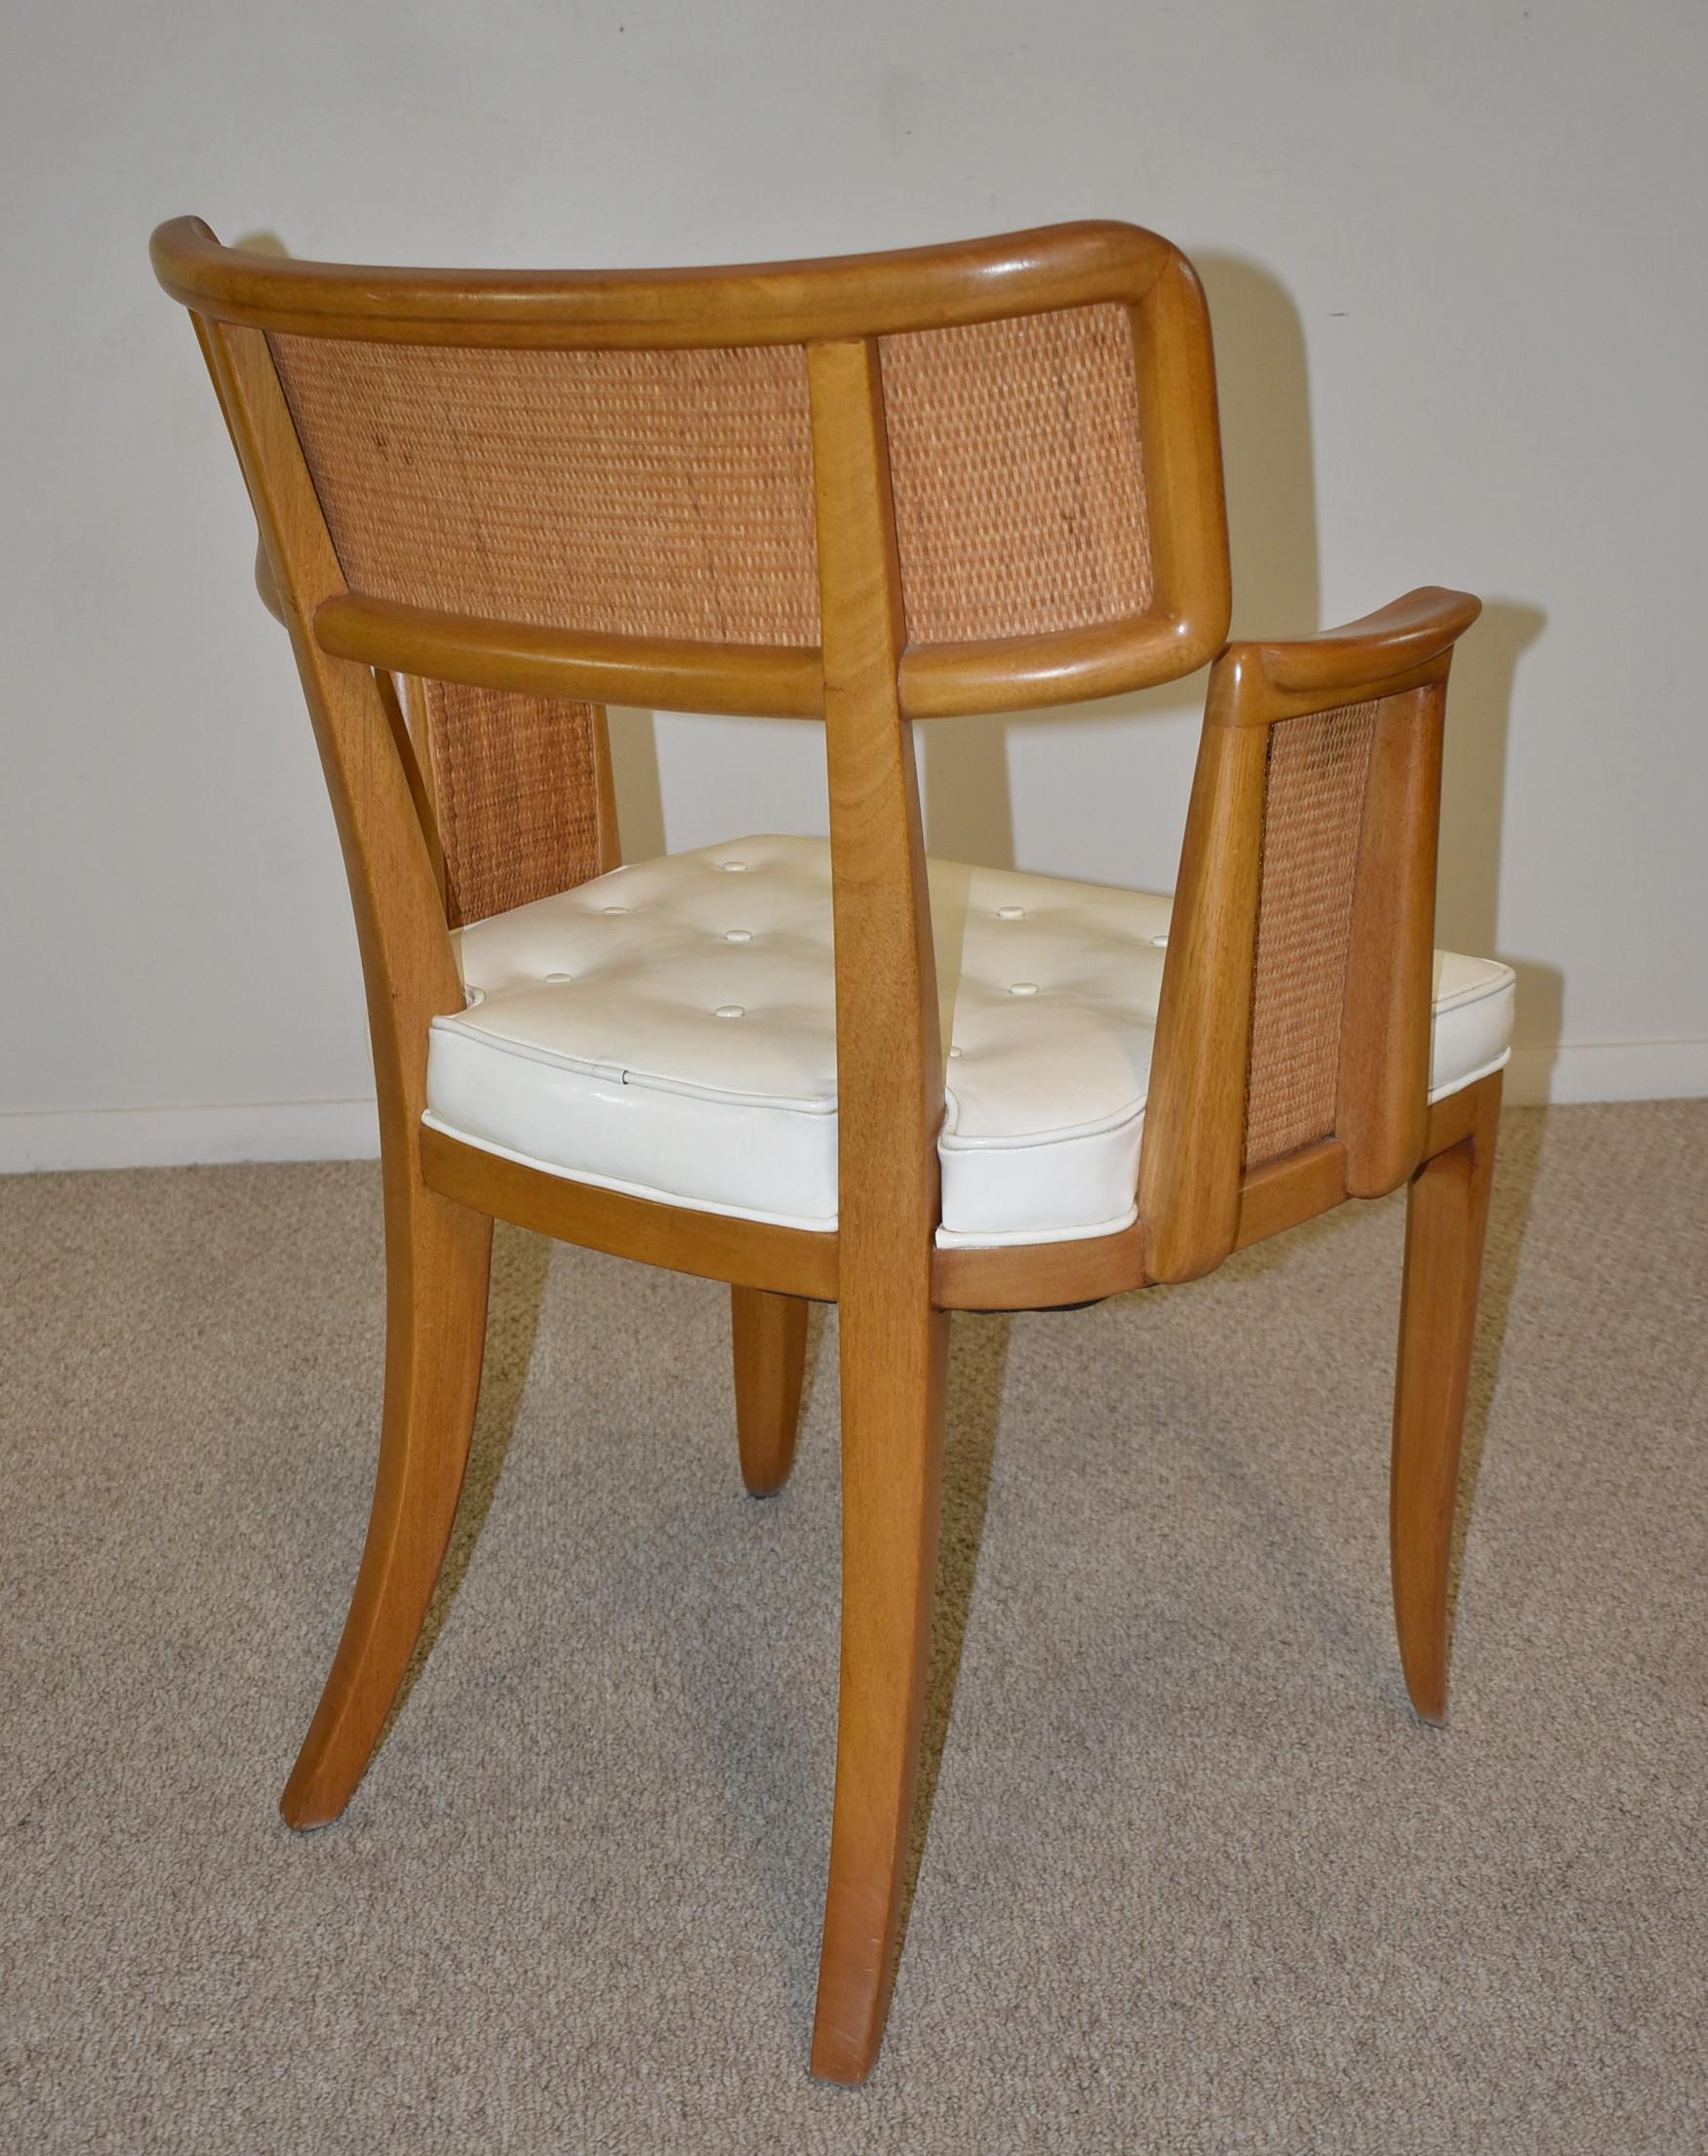 Six Vintage Dunbar Dining Chairs Cane Back Edward Wormley Design, circa 1950's For Sale 3